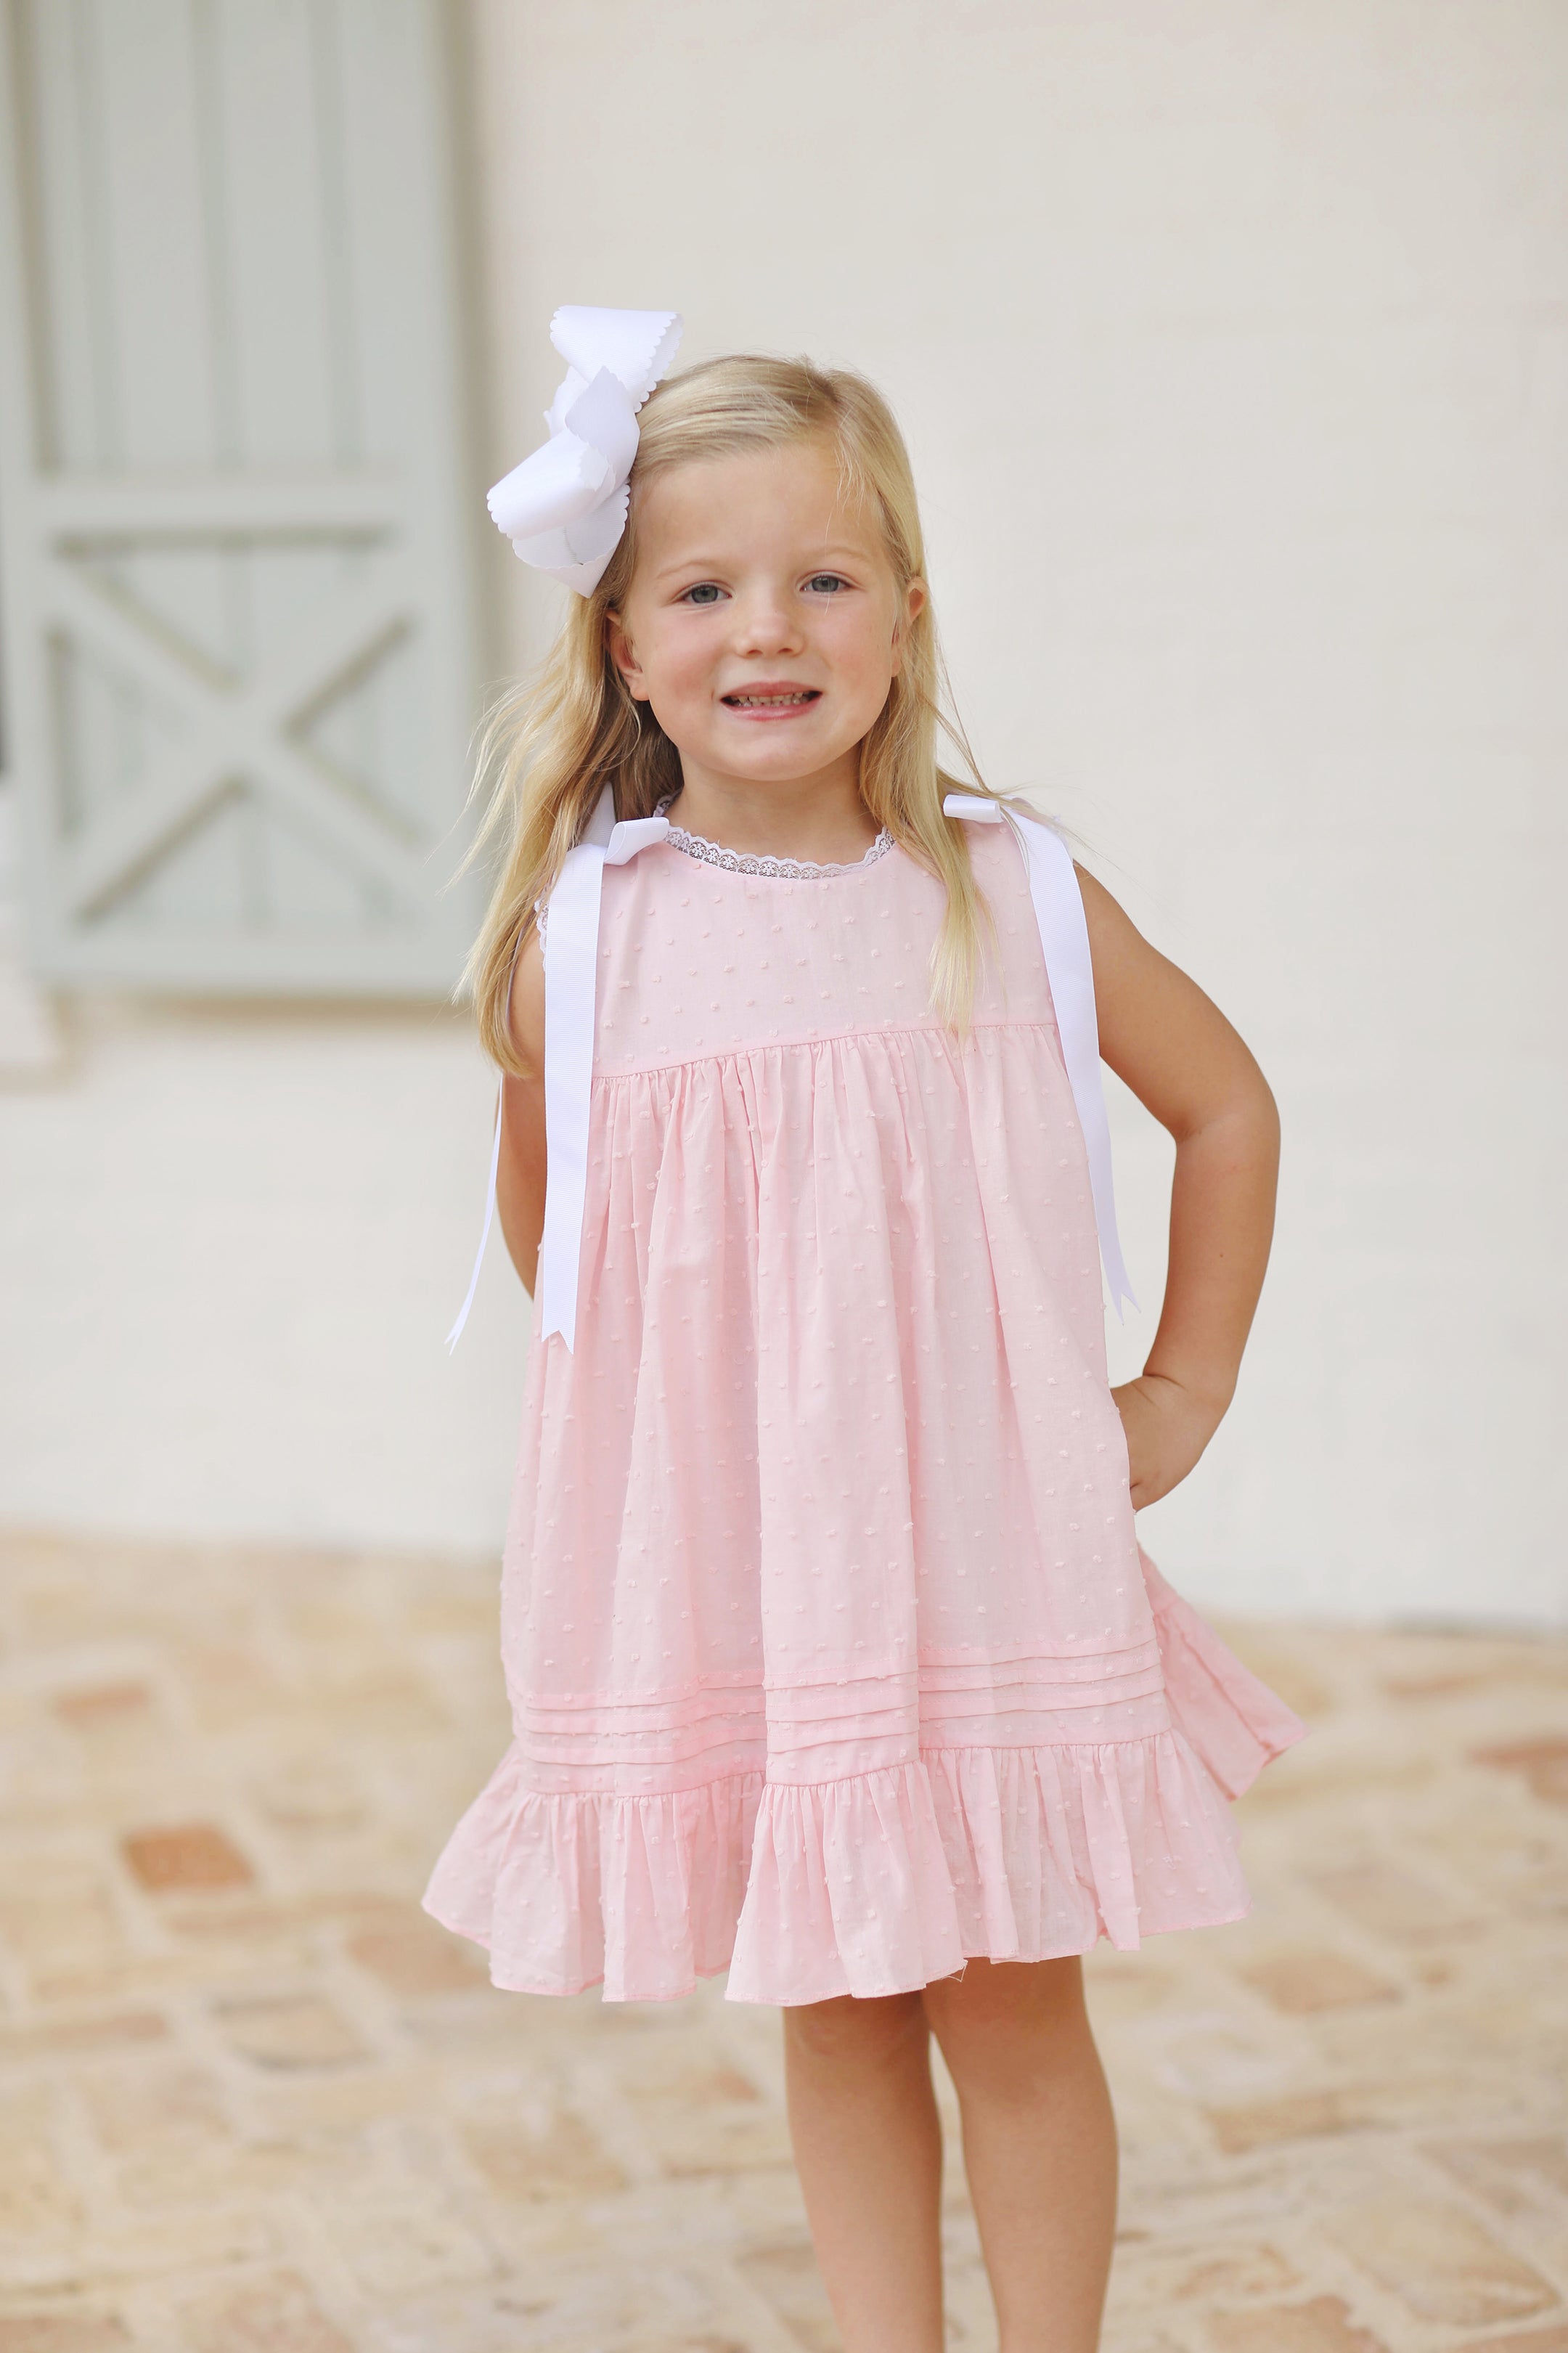 Girls Dresses – The Smocking Place